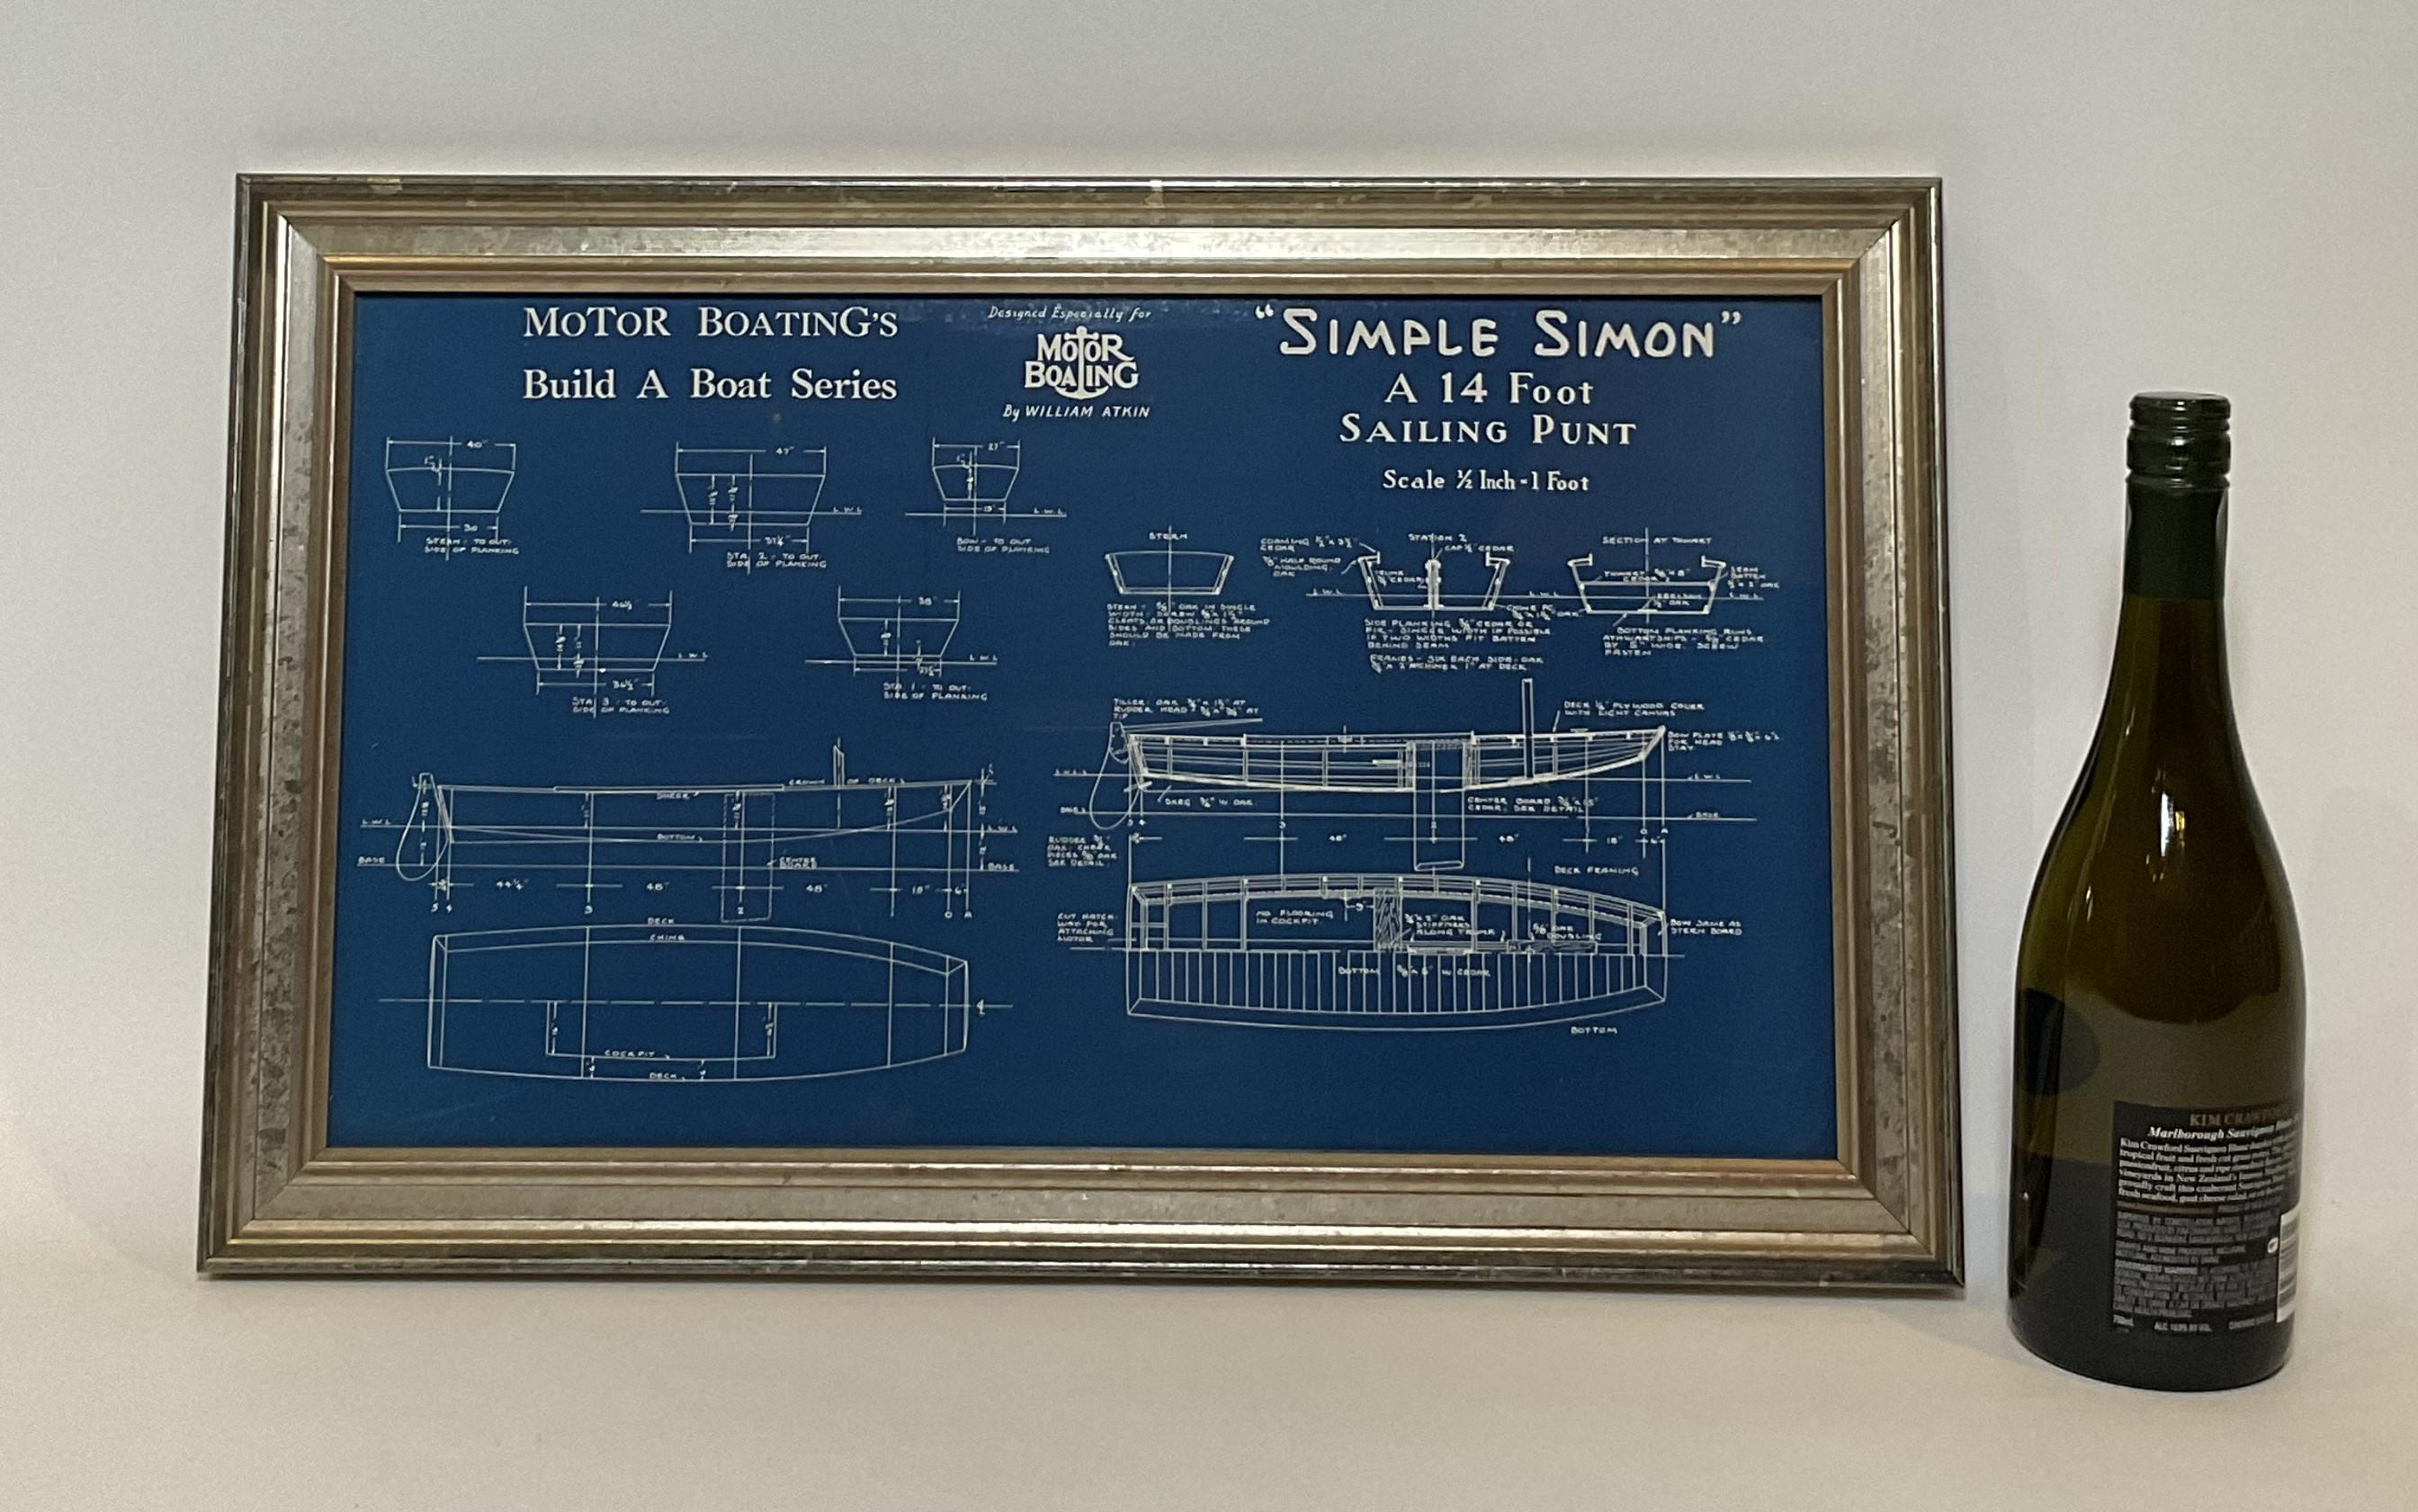 Framed blueprint showing a fourteen foot sailing punt named Simple Simon. The plan is from Motor Boating Publishing in the 1930s. Showing all construction details. Nicely framed.

Overall Dimensions: 14